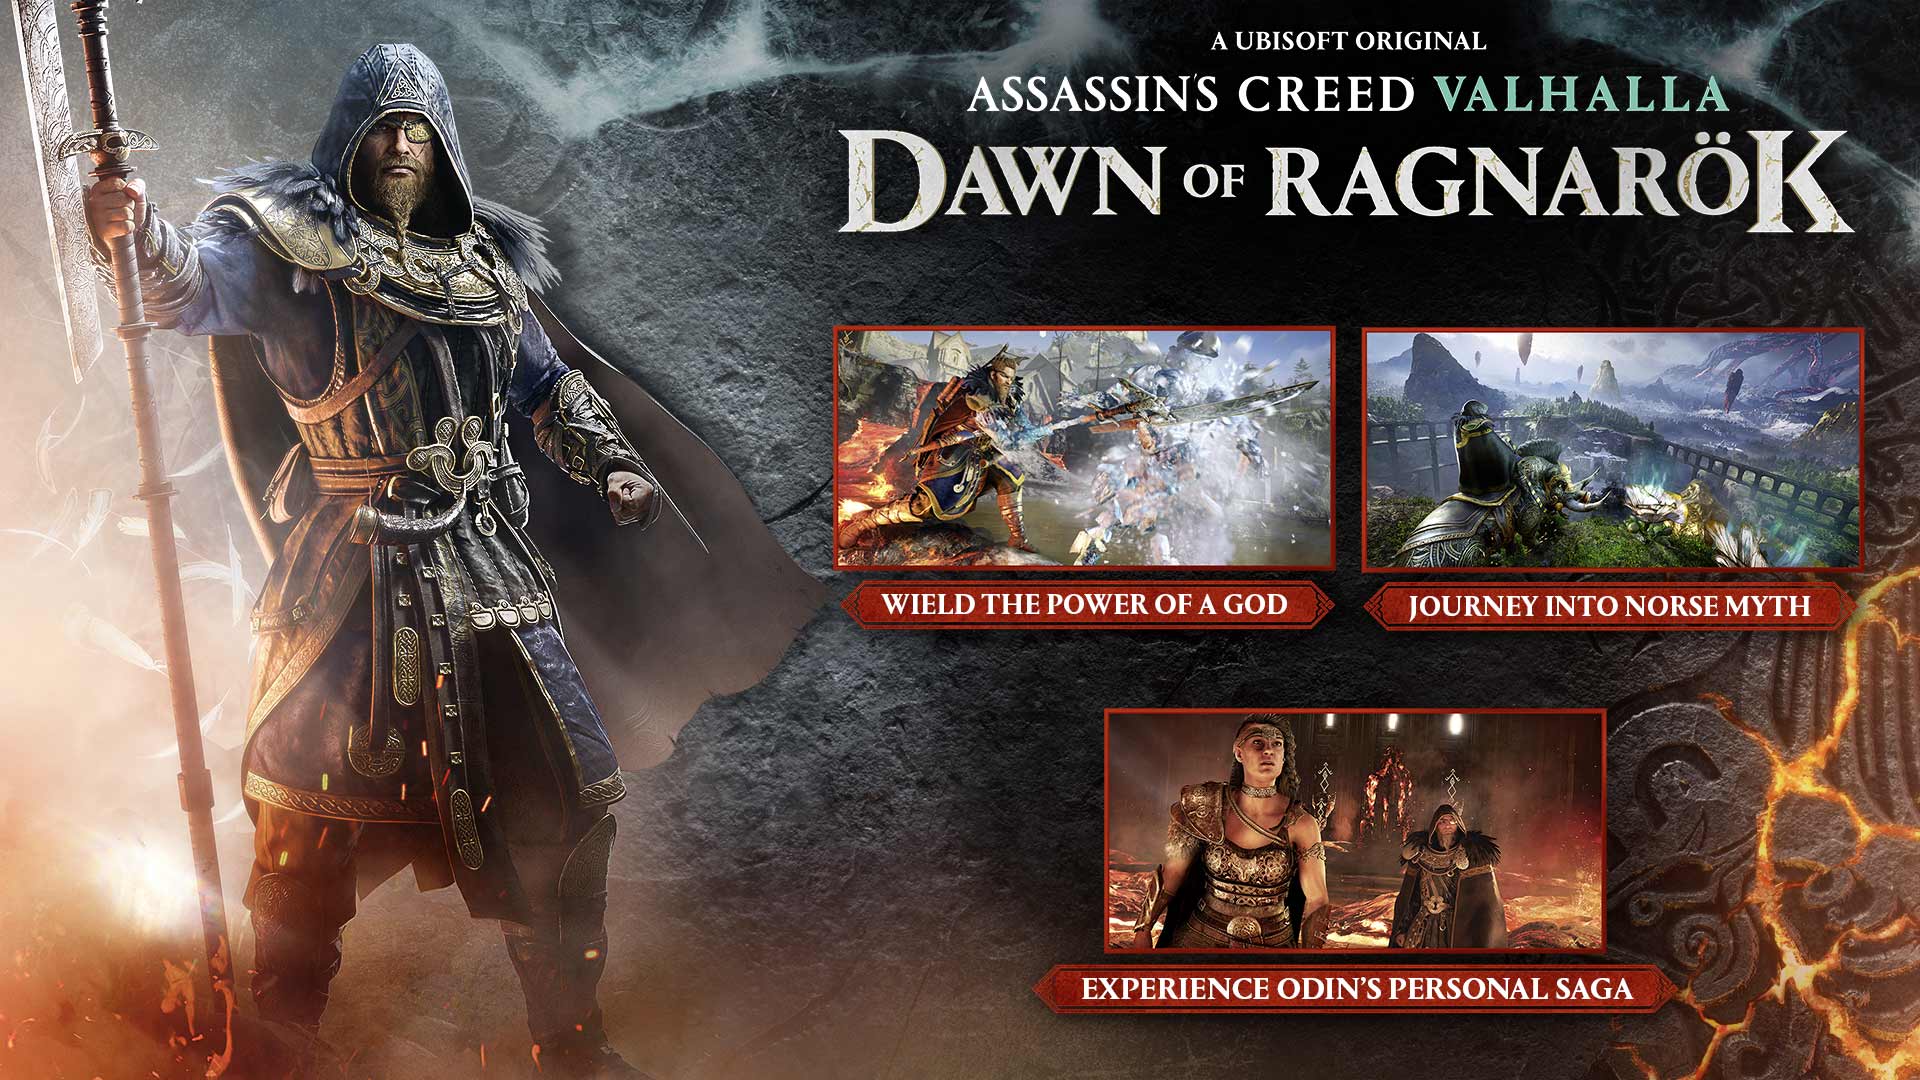 Buy Assassin's Creed® Valhalla Complete Edition from the Humble